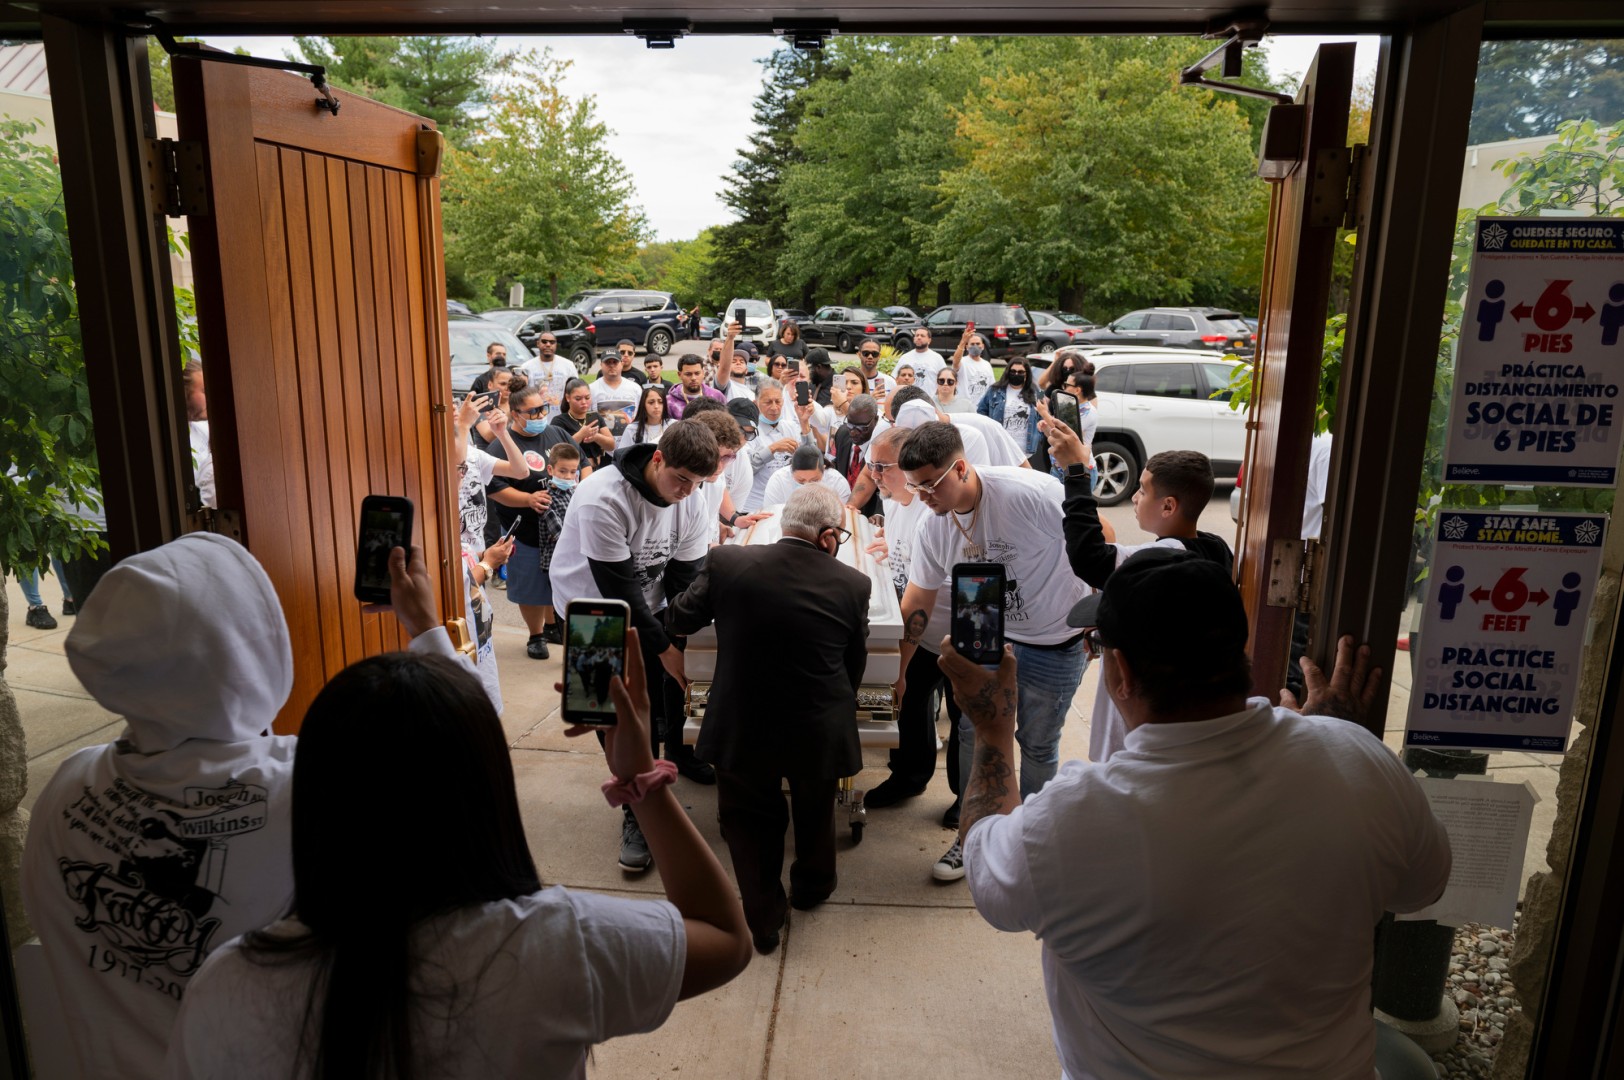 A group of people attend a funeral as attendees help move the casket.